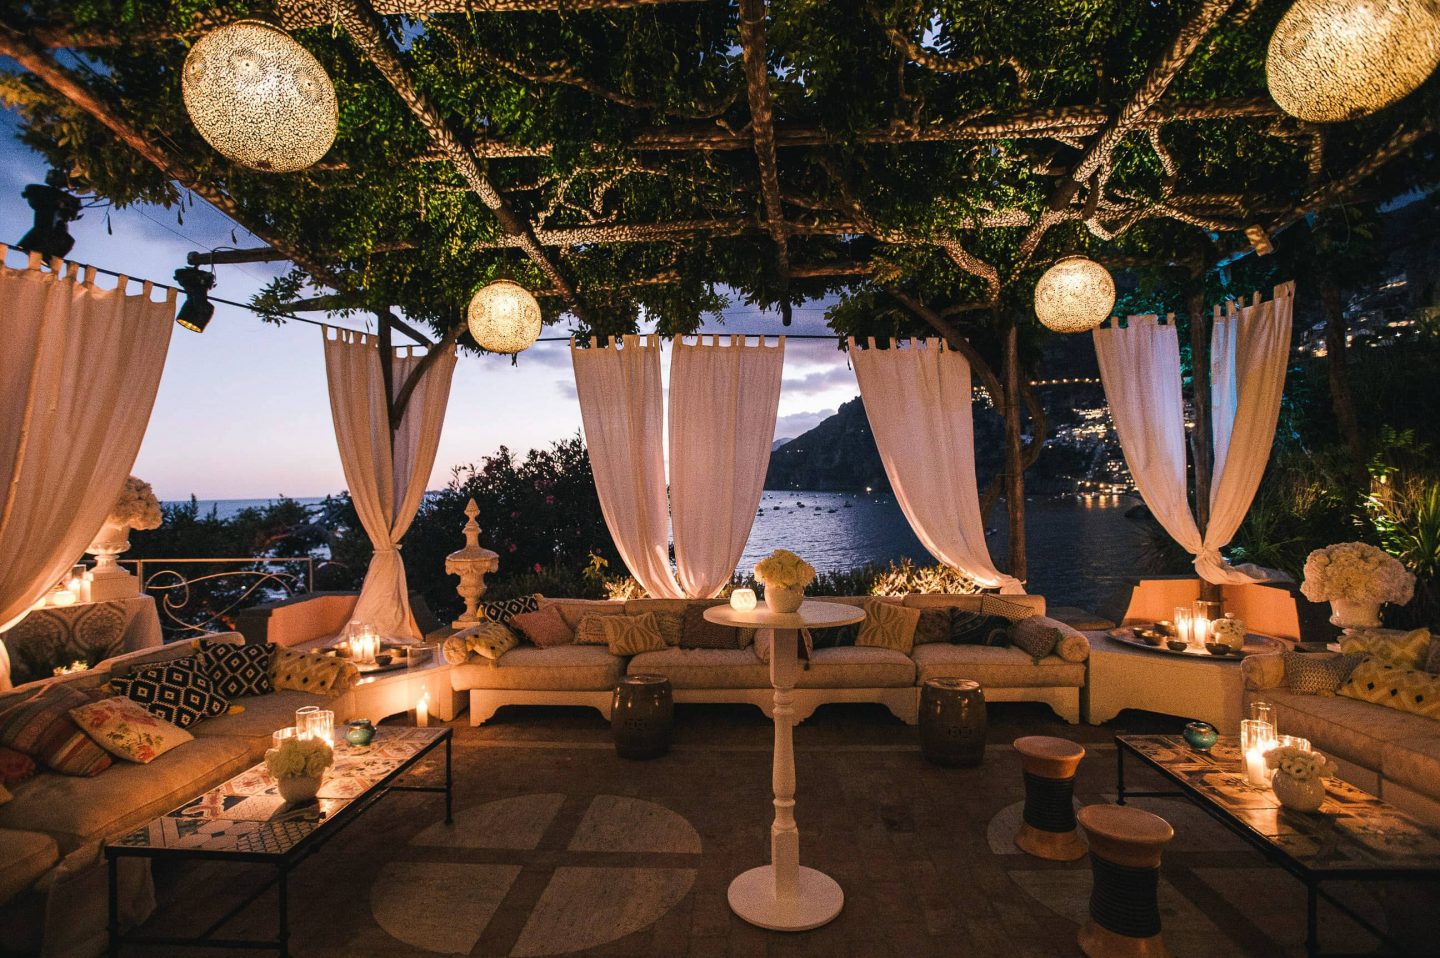 Outdoor lounge at night at the Midsummer Night's Eve-themed white welcome party at this Positano wedding weekend in Villa Tre Ville | Photo by Gianni di Natale